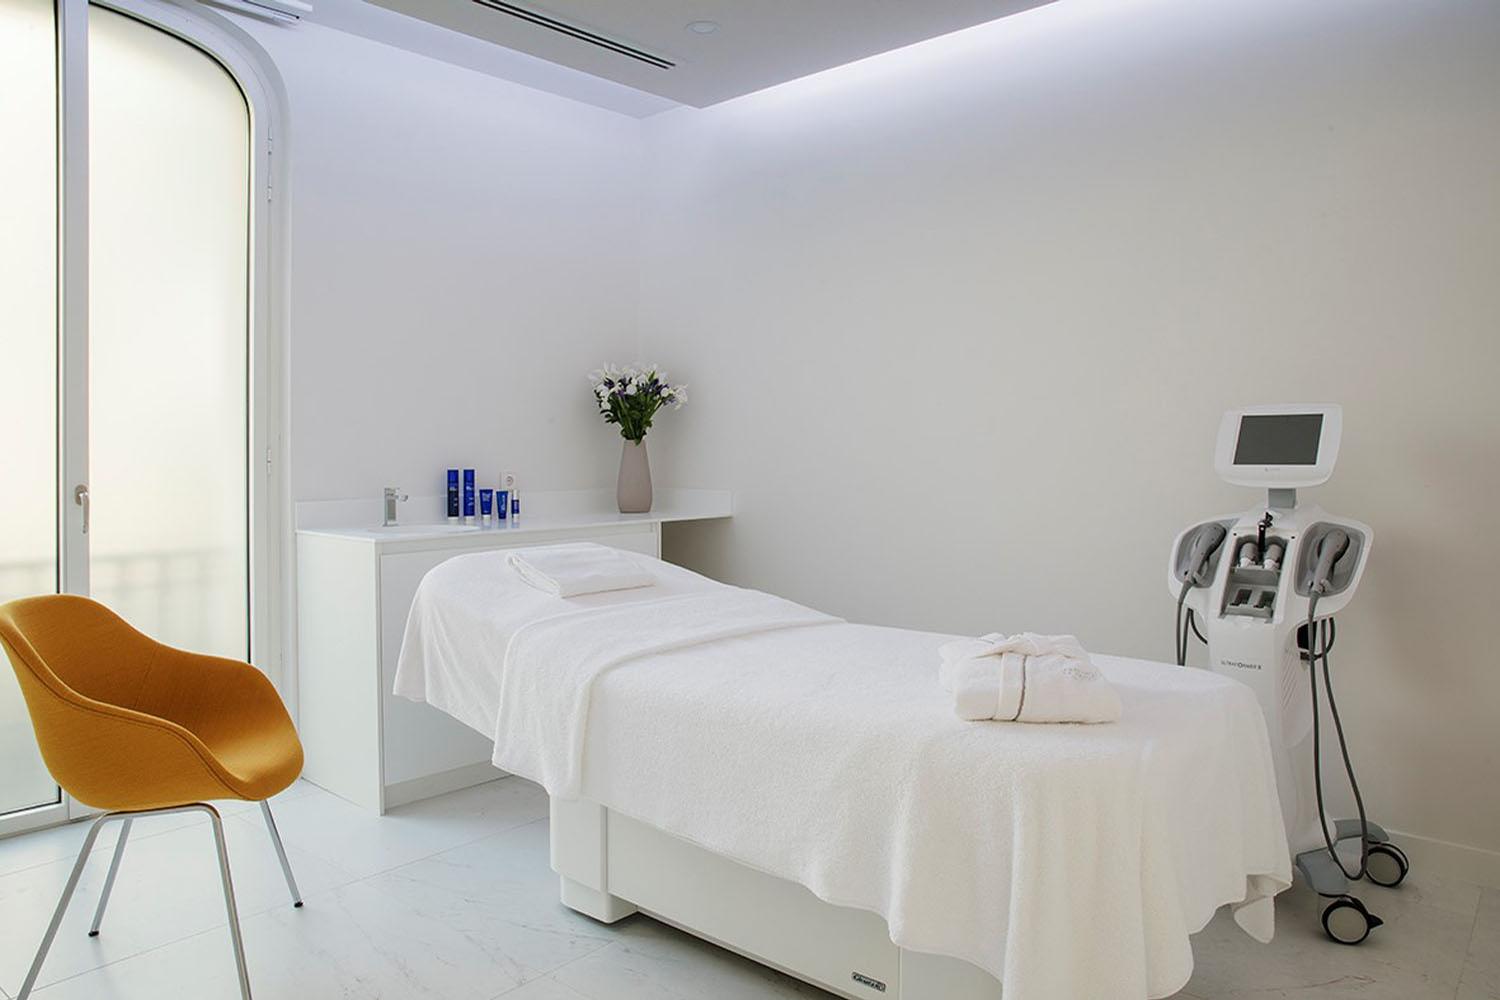 Clinique La Prairie has selected Swiss Perfection to supply treatments at the clinic